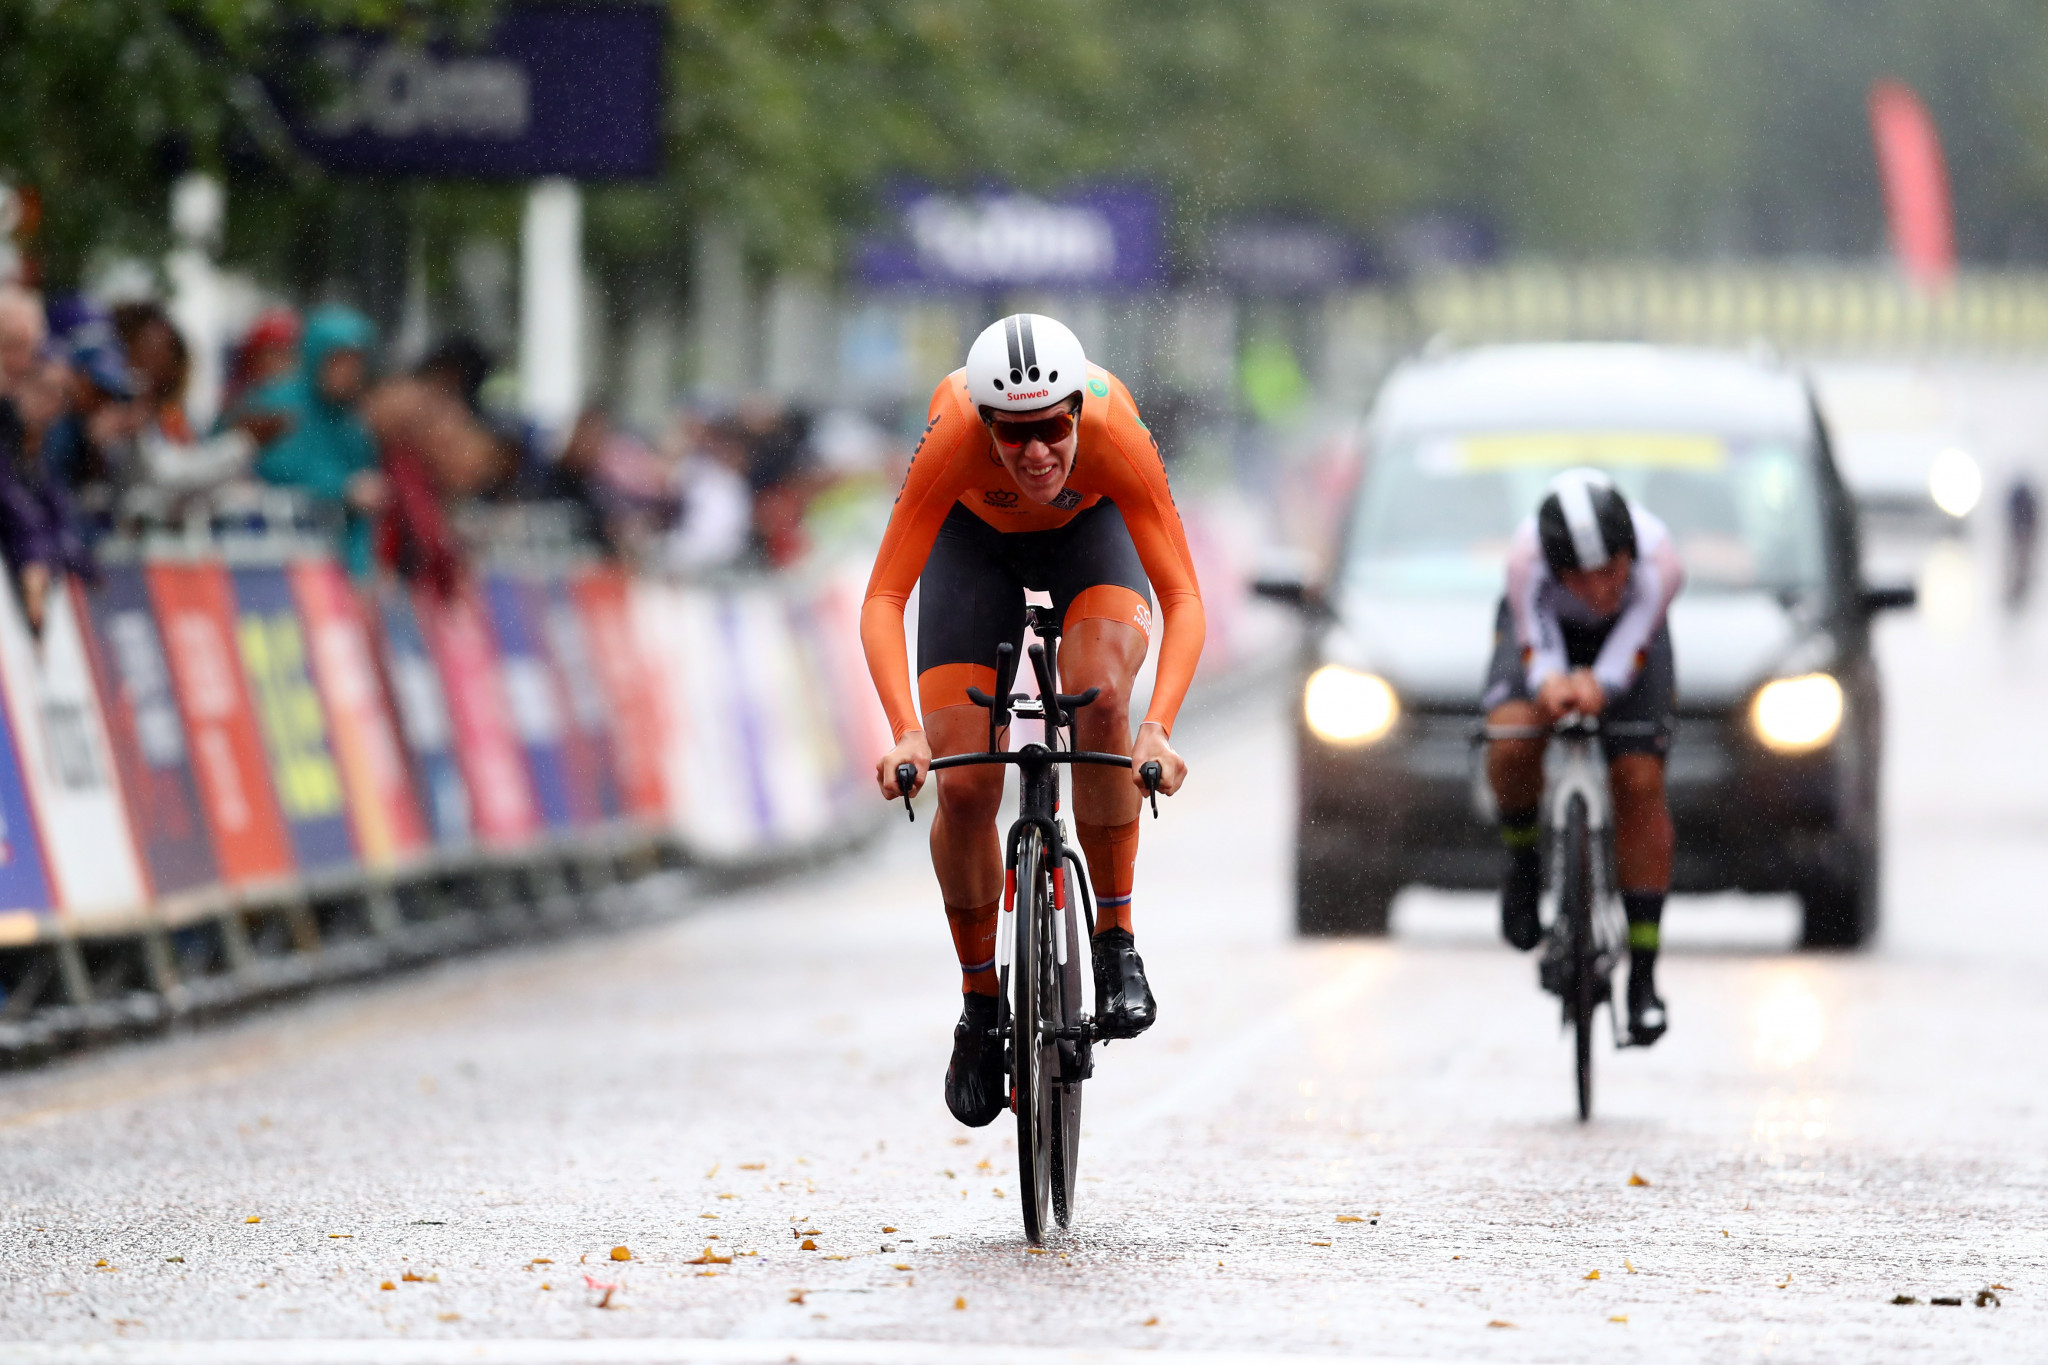 Van Dijk edges compatriot on weather-affected course to win third consecutive European Championships time trial gold